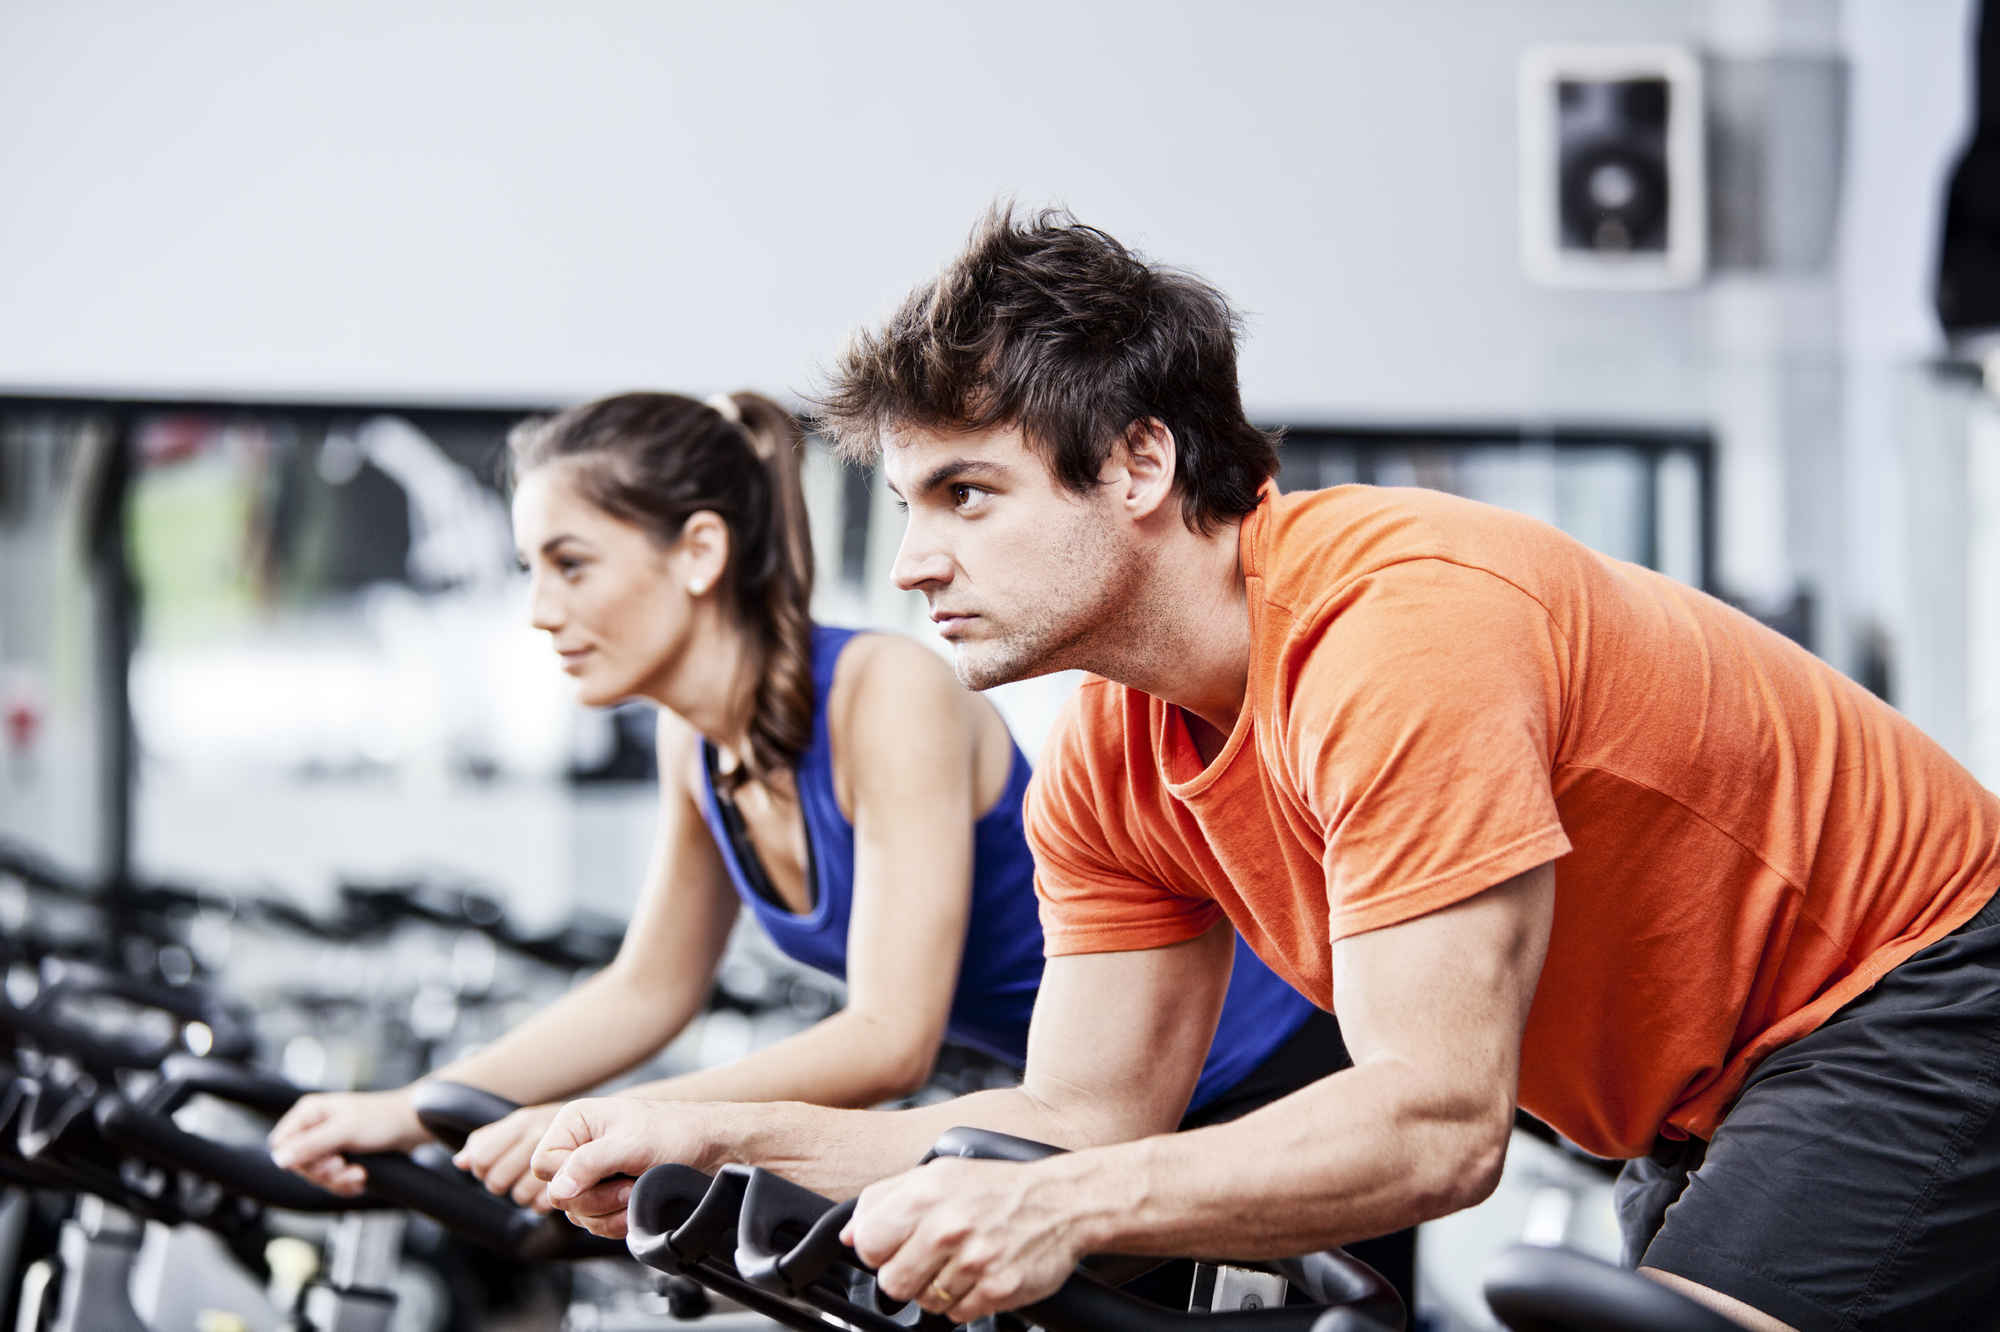 How To Get The Most Out Of 30 Minutes At The Gym | HuffPost